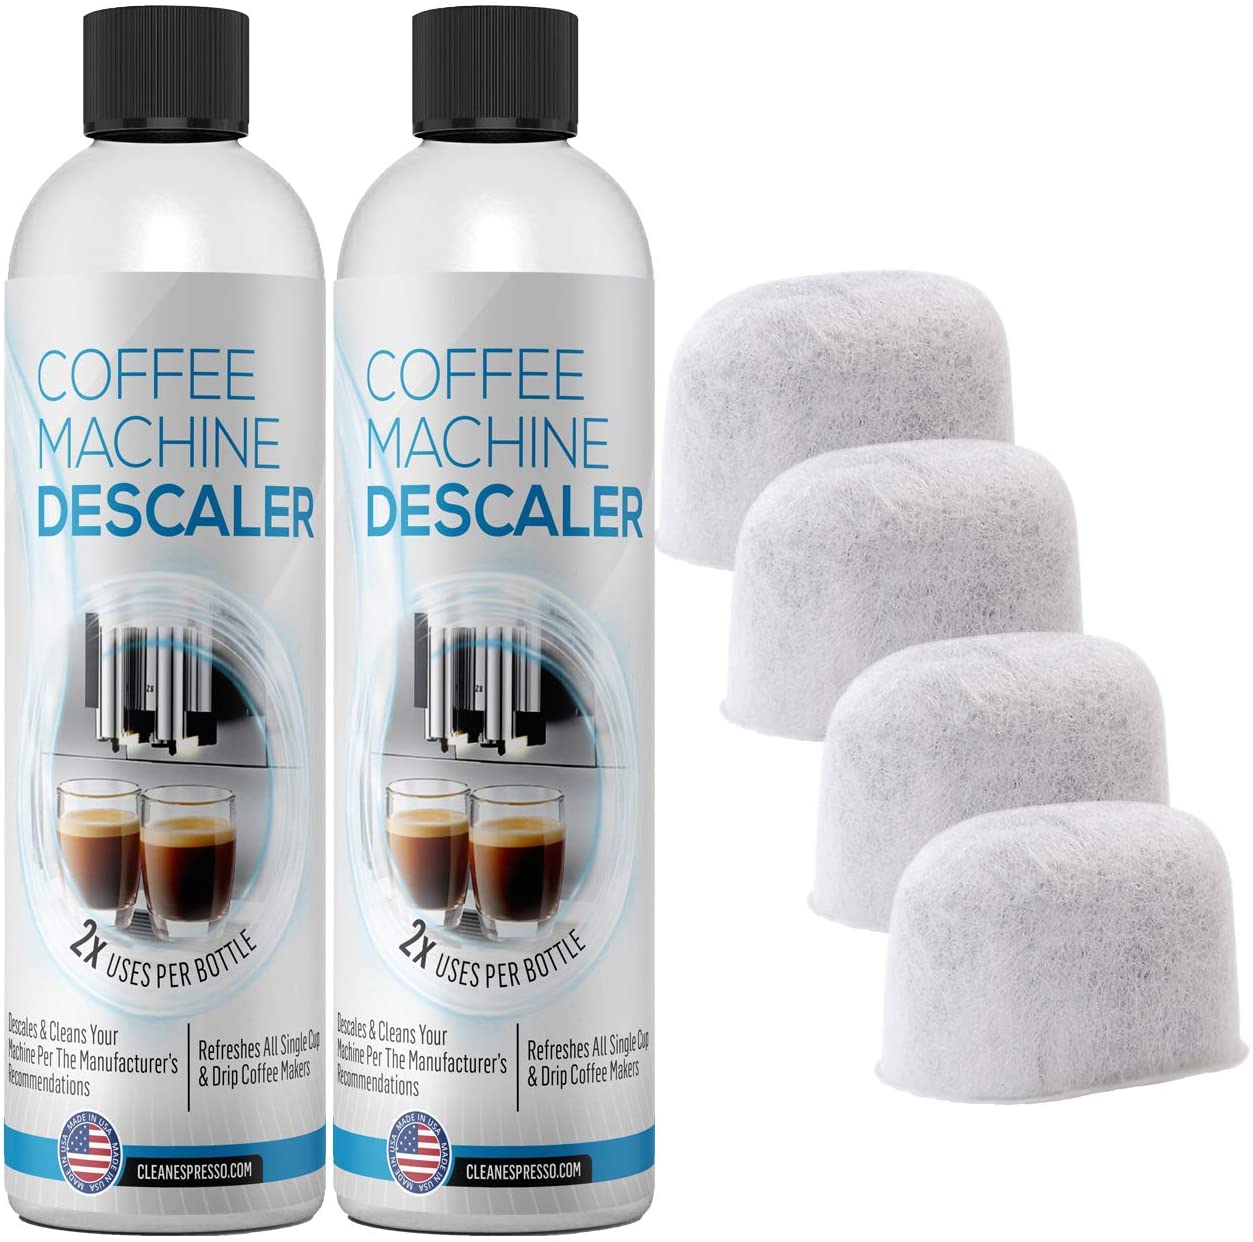 (4+4) 4-Use Coffee Machine Descaling Solution Plus 4 Filters – Universal Descaler Concentrate for All Keurig 1.0 & 2.0 K-Cup Pod Machines and…